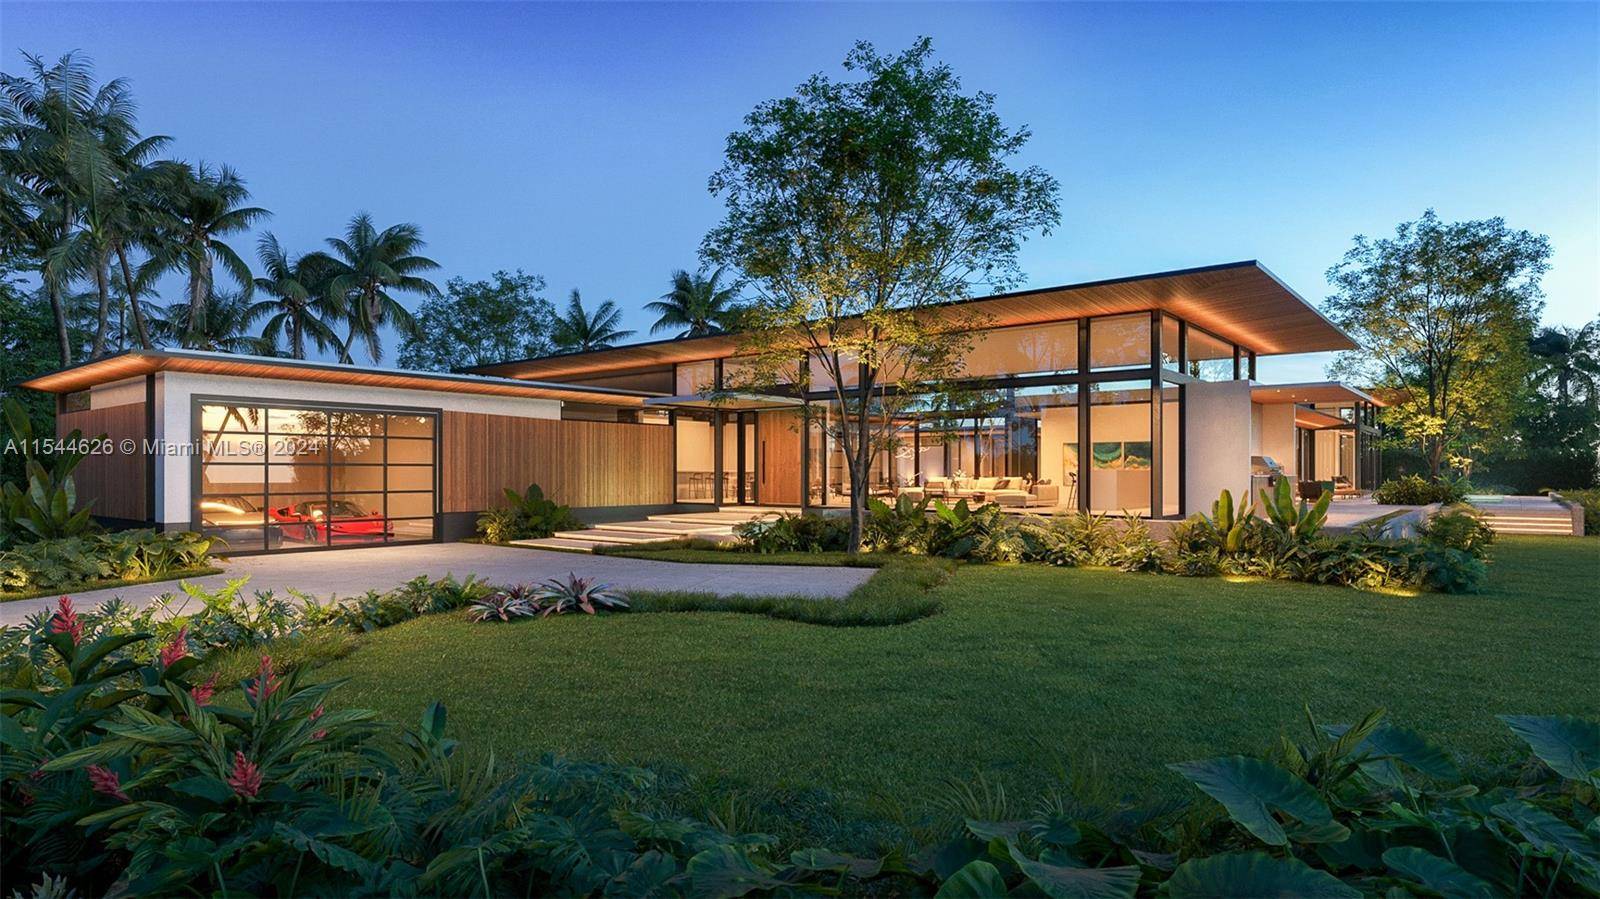 Envision an exquisite, single story contemporary masterpiece nestled on this expansive 25, 896 SF lot within the prestigious and guarded enclave of La Gorce Island in Miami Beach.